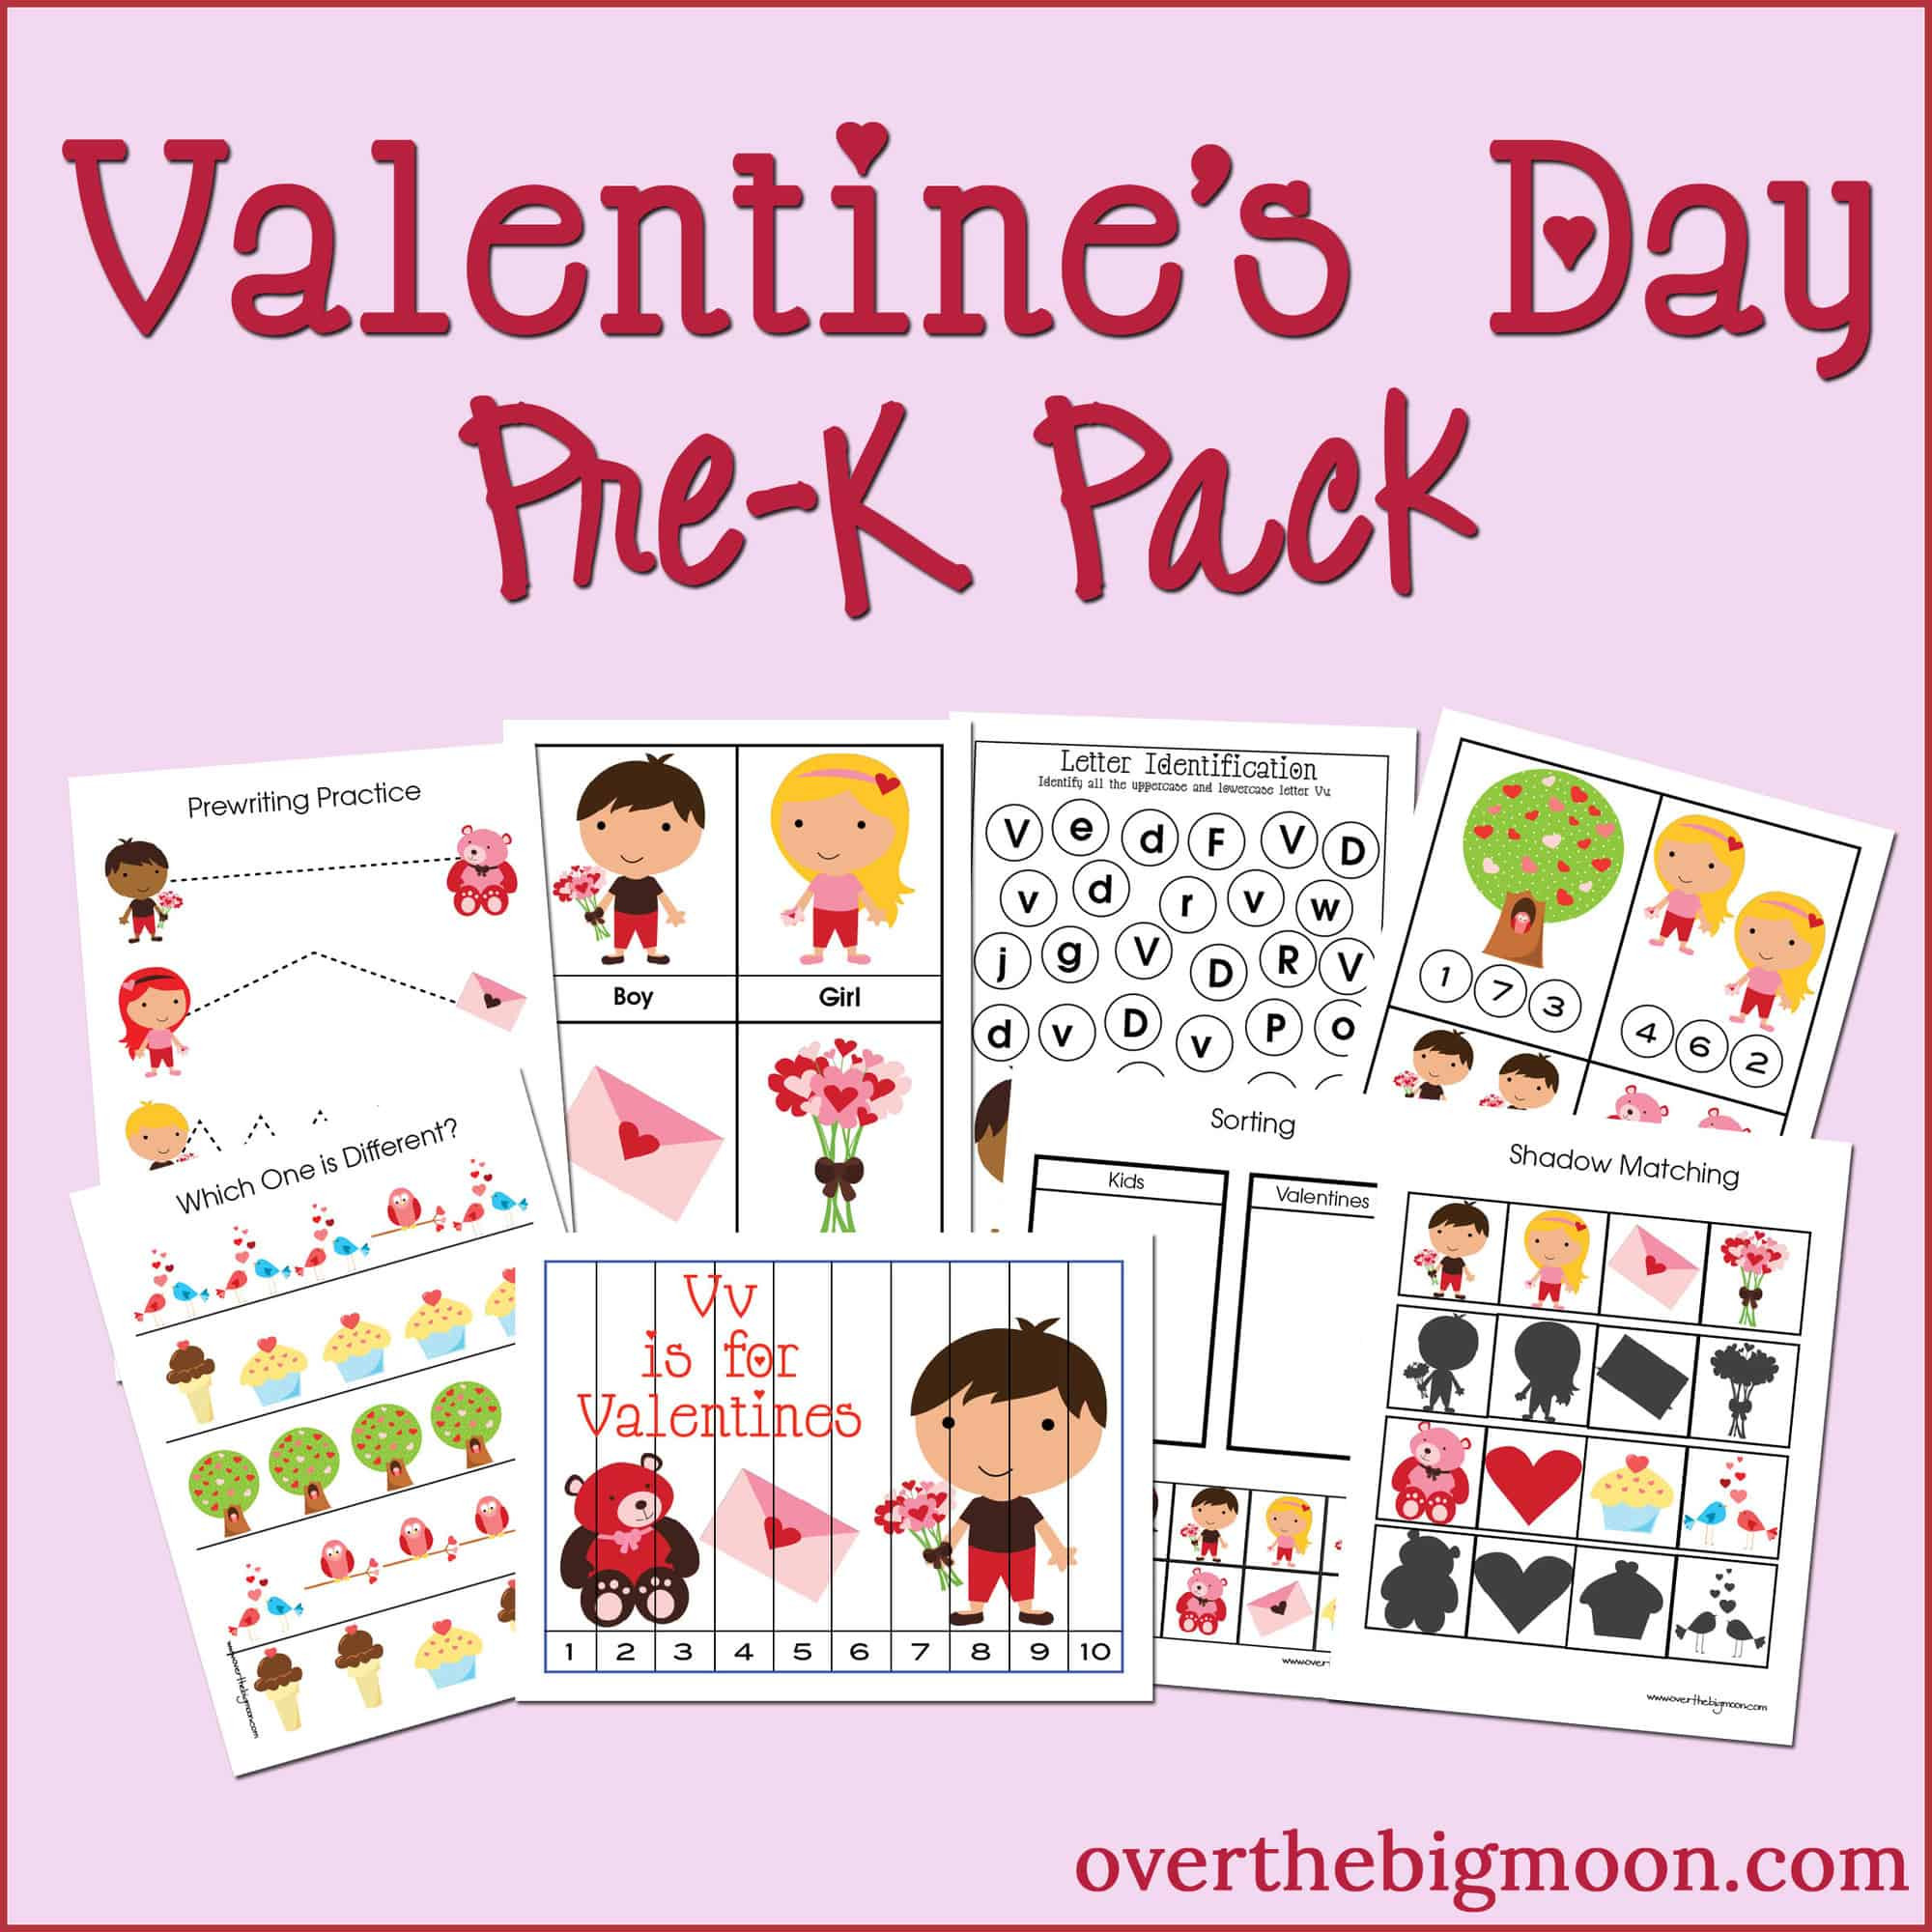 Valentines Day Activities For Preschoolers
 Valentine s Day Pre K Pack Over the Big Moon